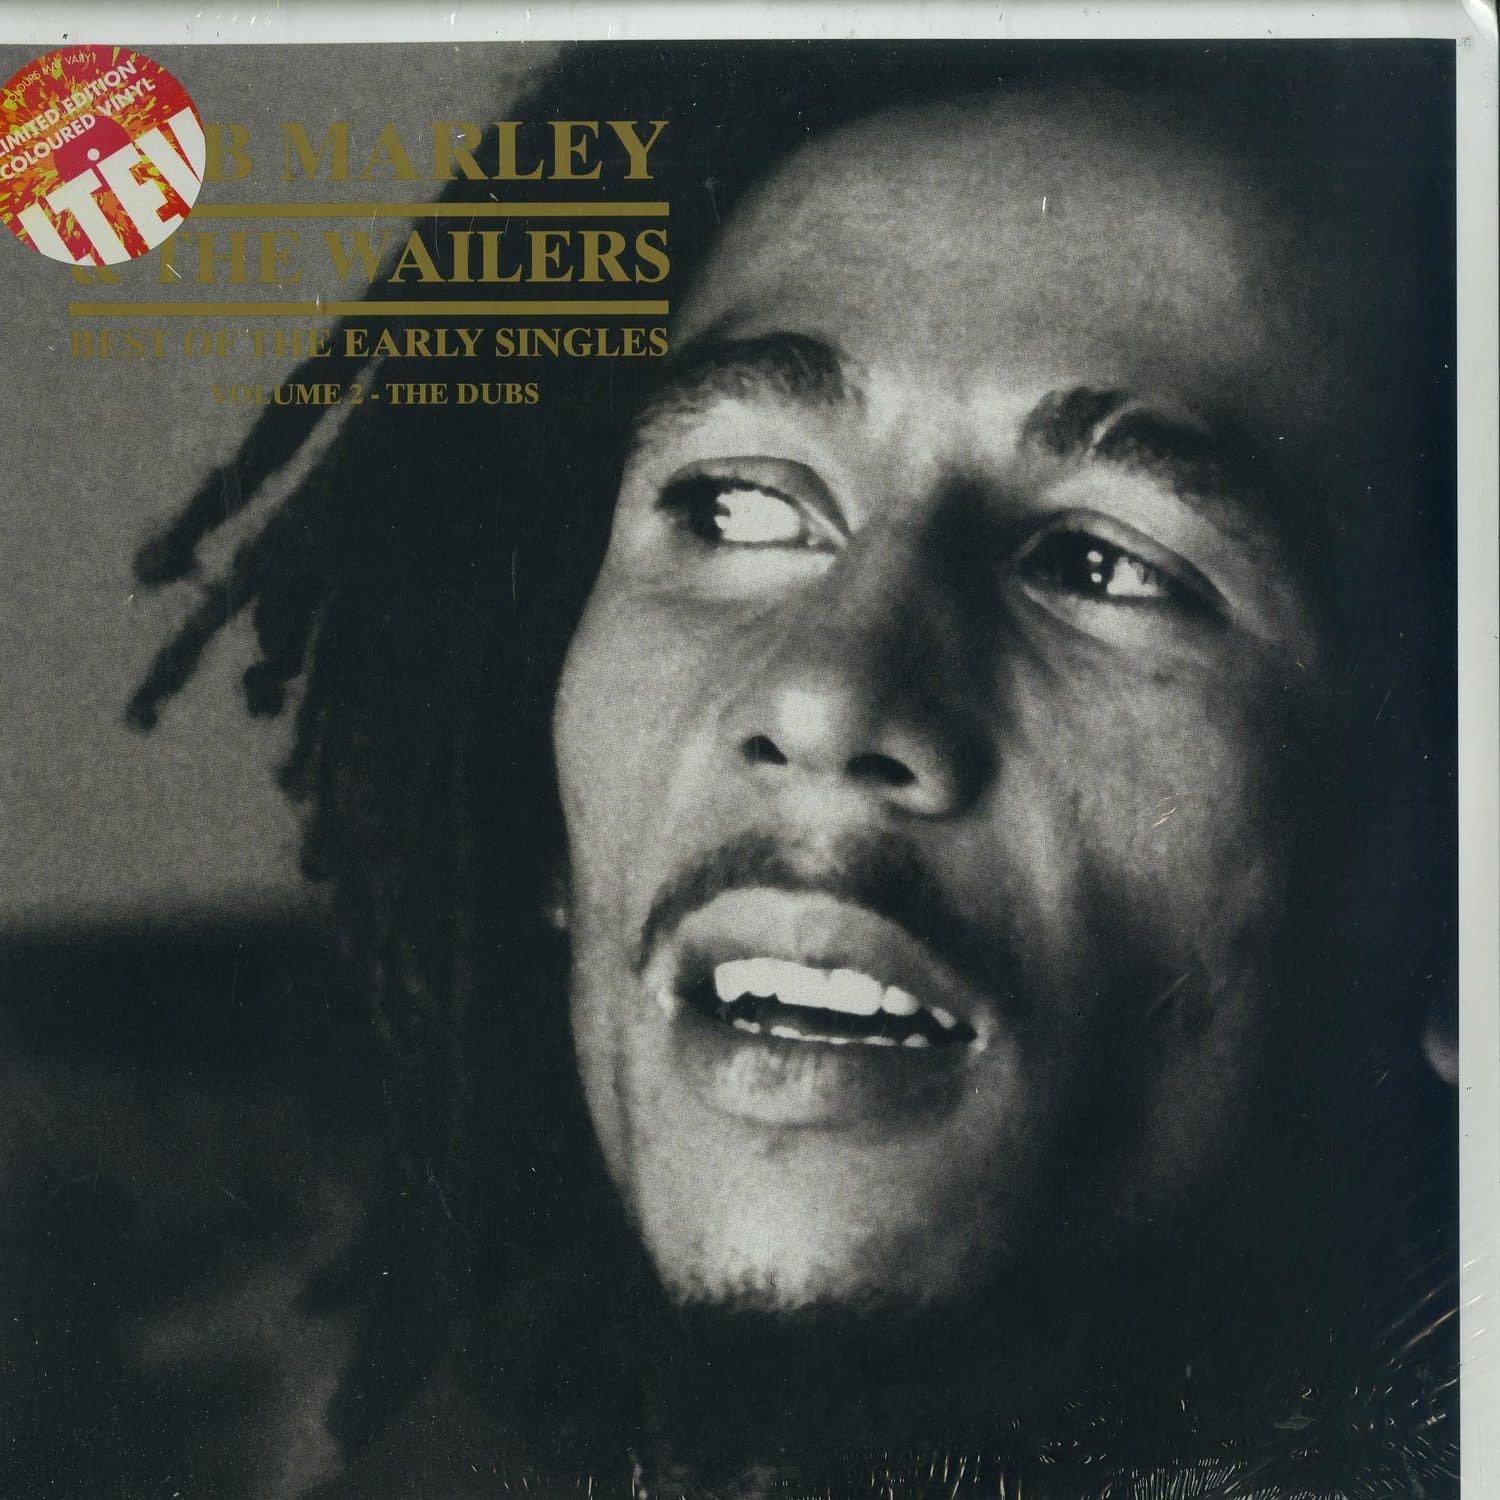 Bob Marley & The Wailers - BEST OF THE EARLY SINGLES VOL. 2 - THE DUBS 